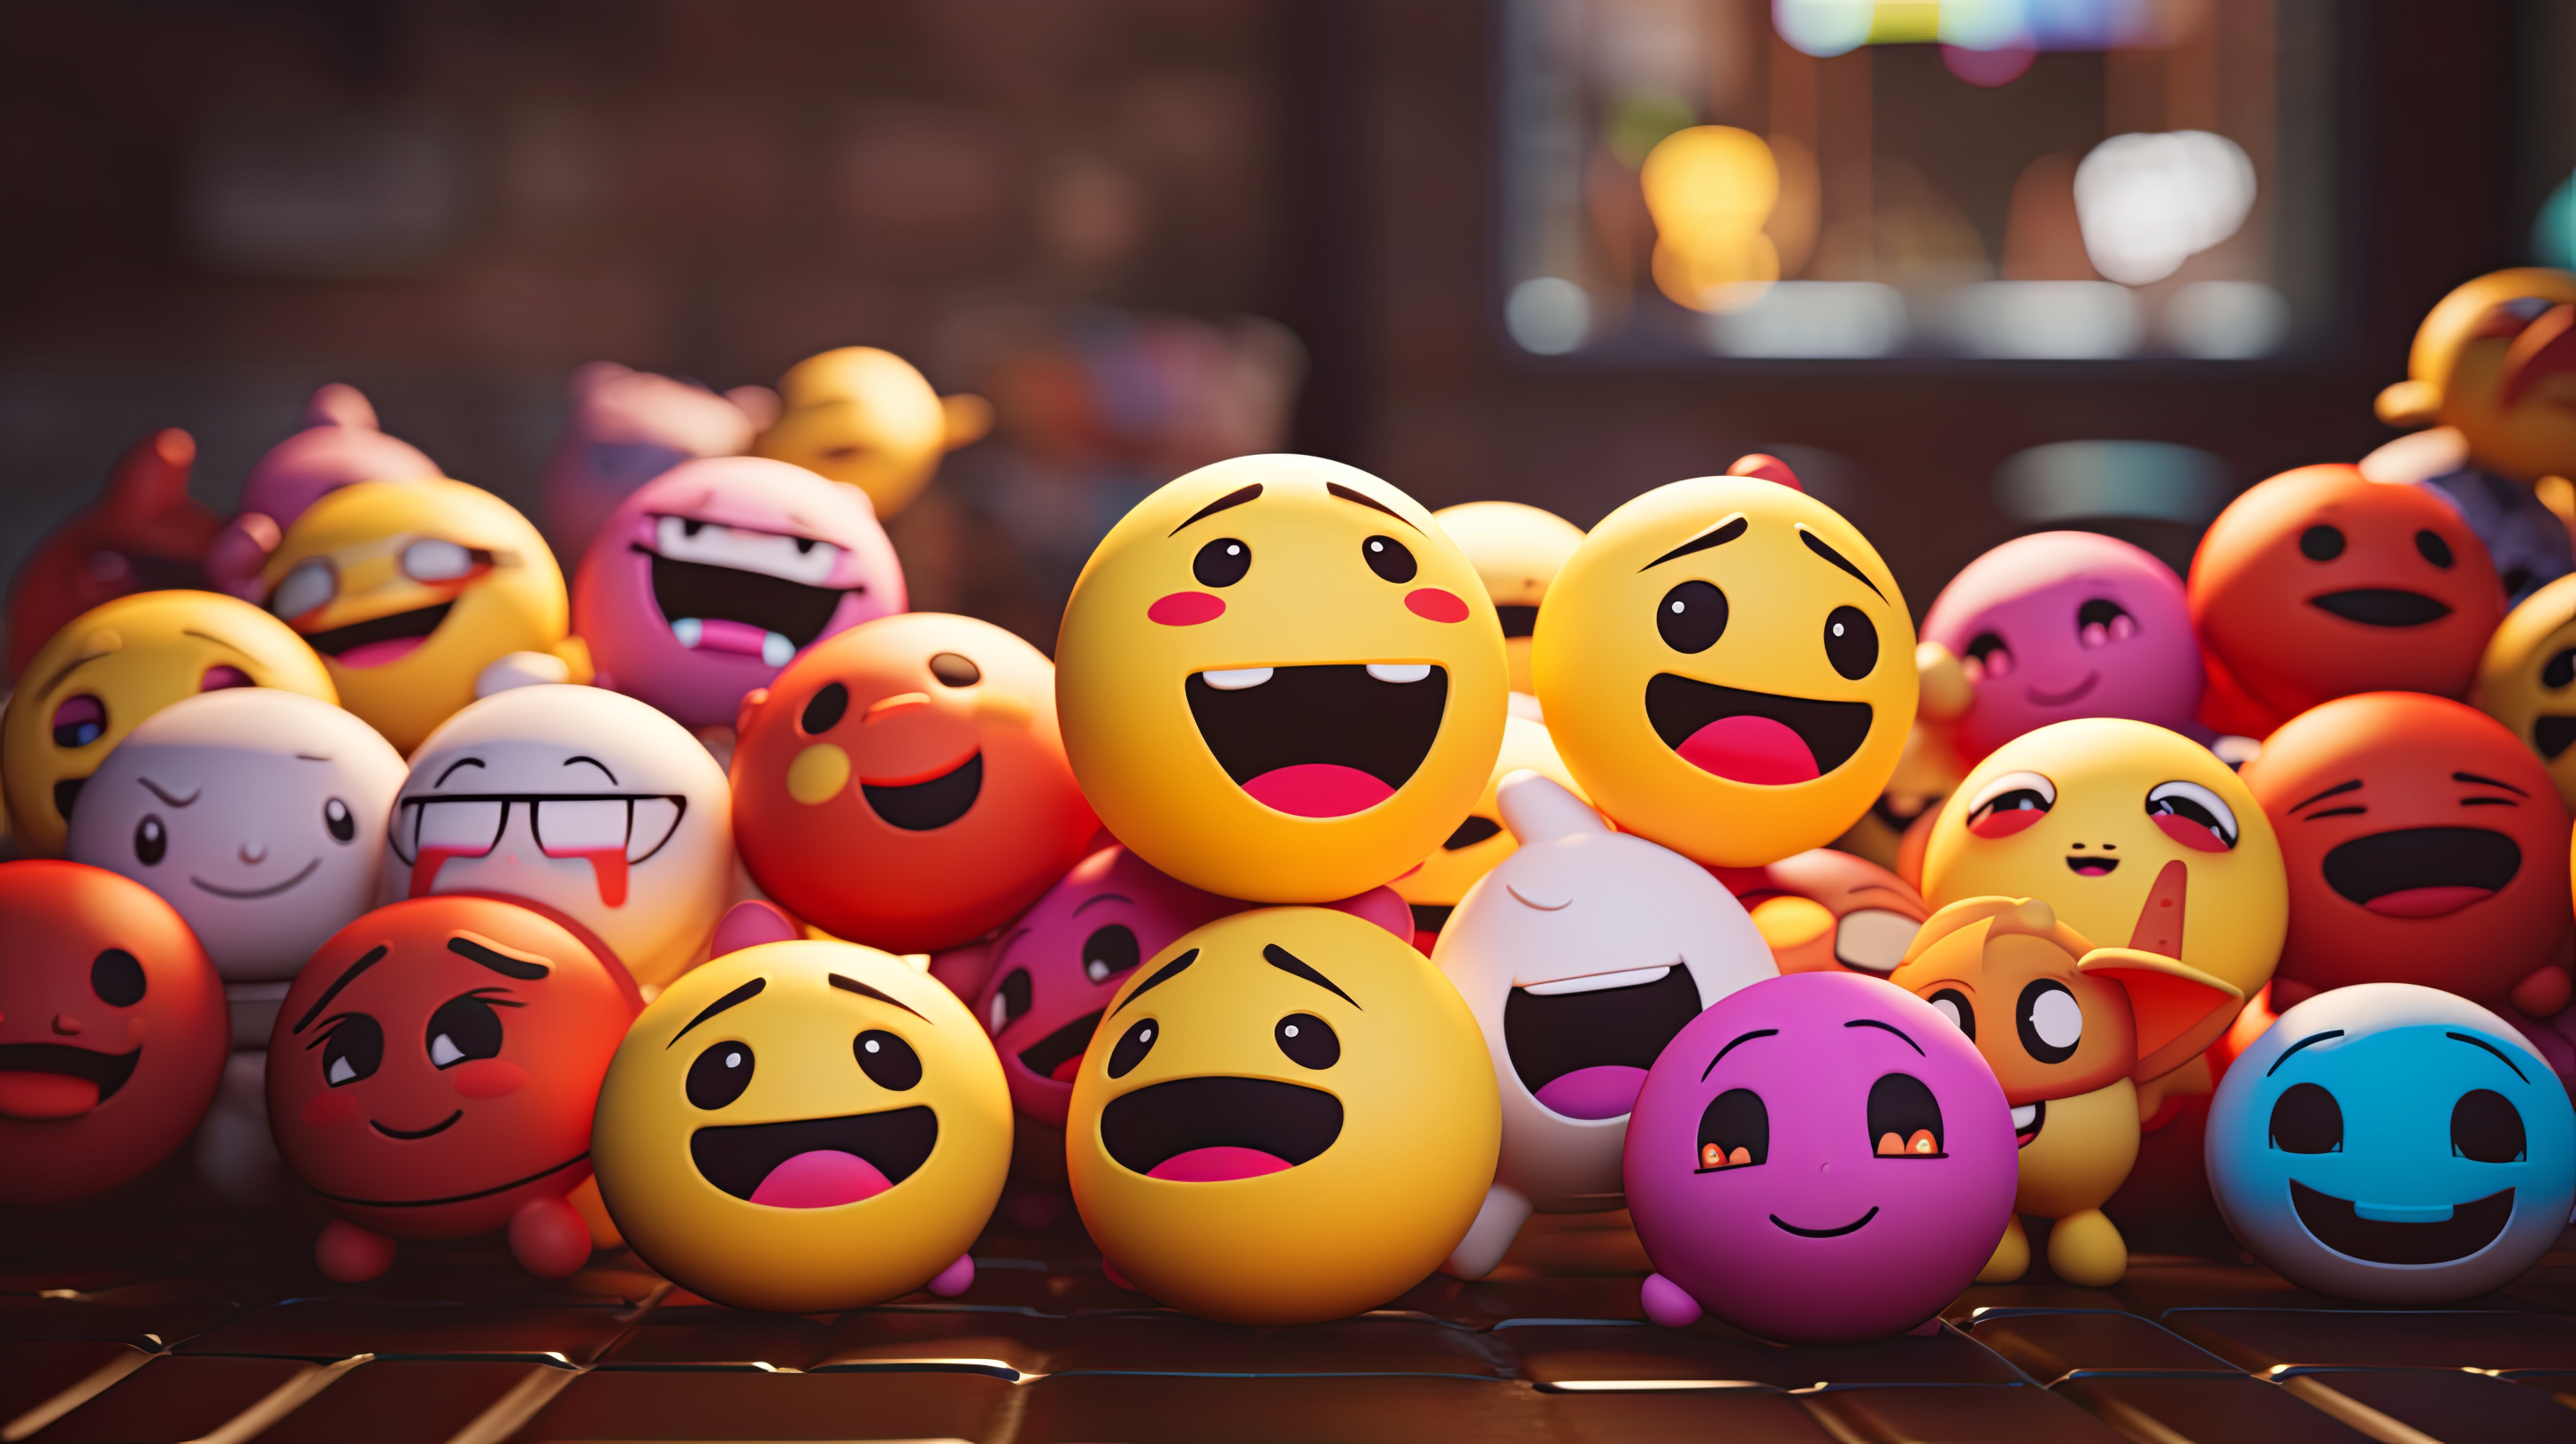 HD wallpaper with a variety of 3D emoji expressions on a blurred background, perfect for desktops and digital art enthusiasts.